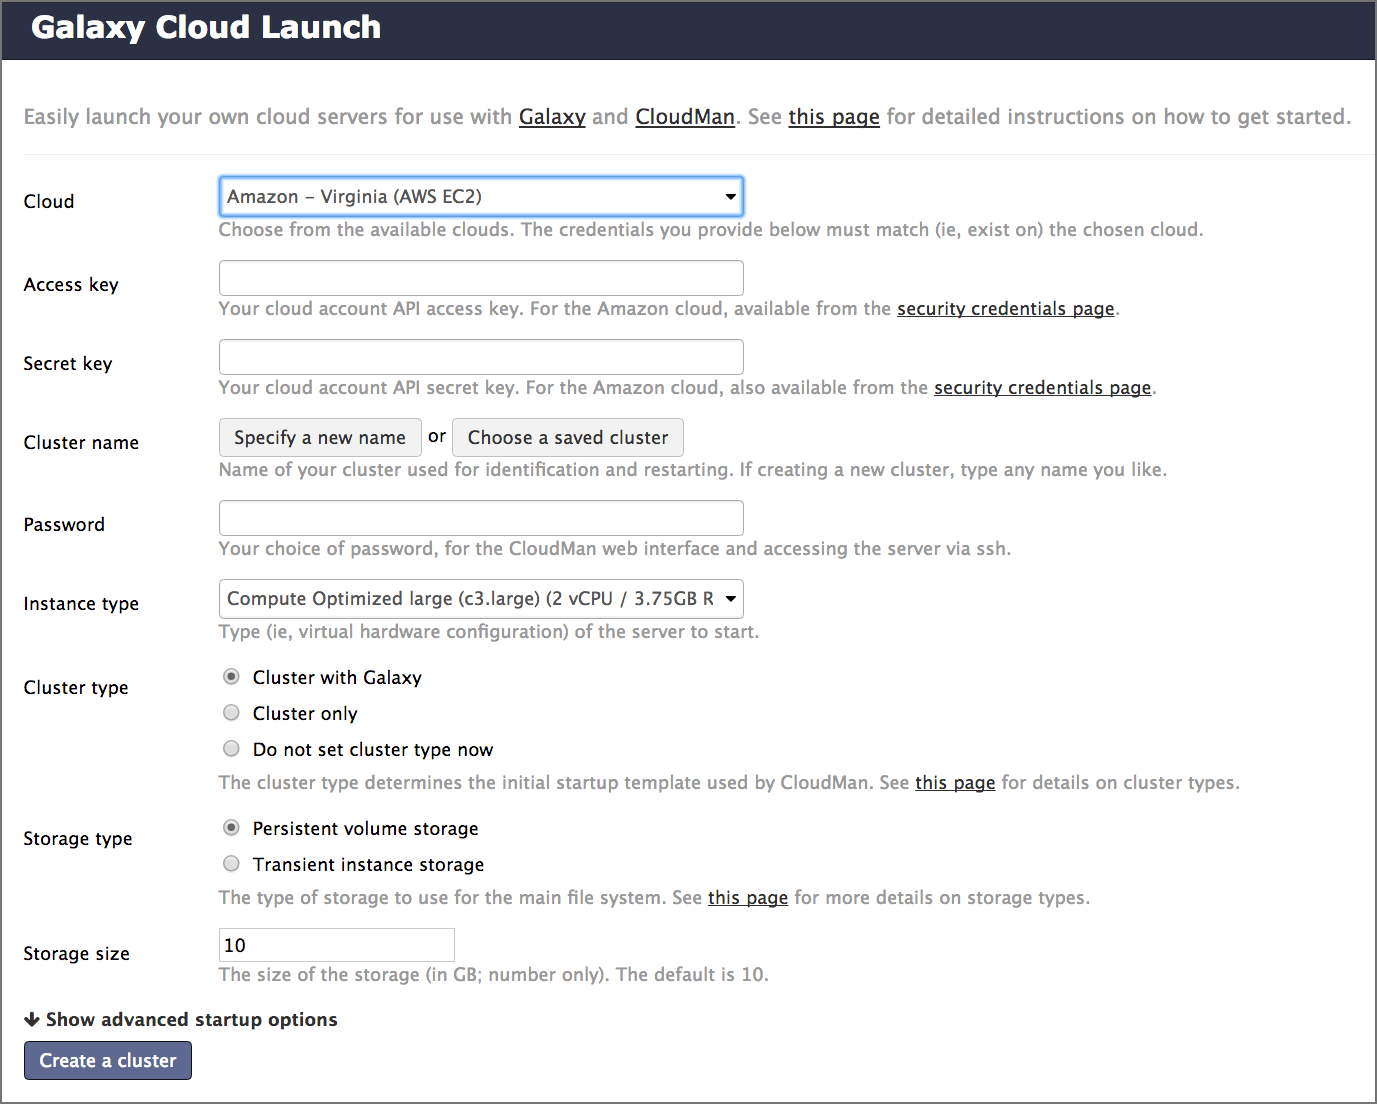 Illegible screenshot of Galaxy Cloud Launch with a form for entering data.